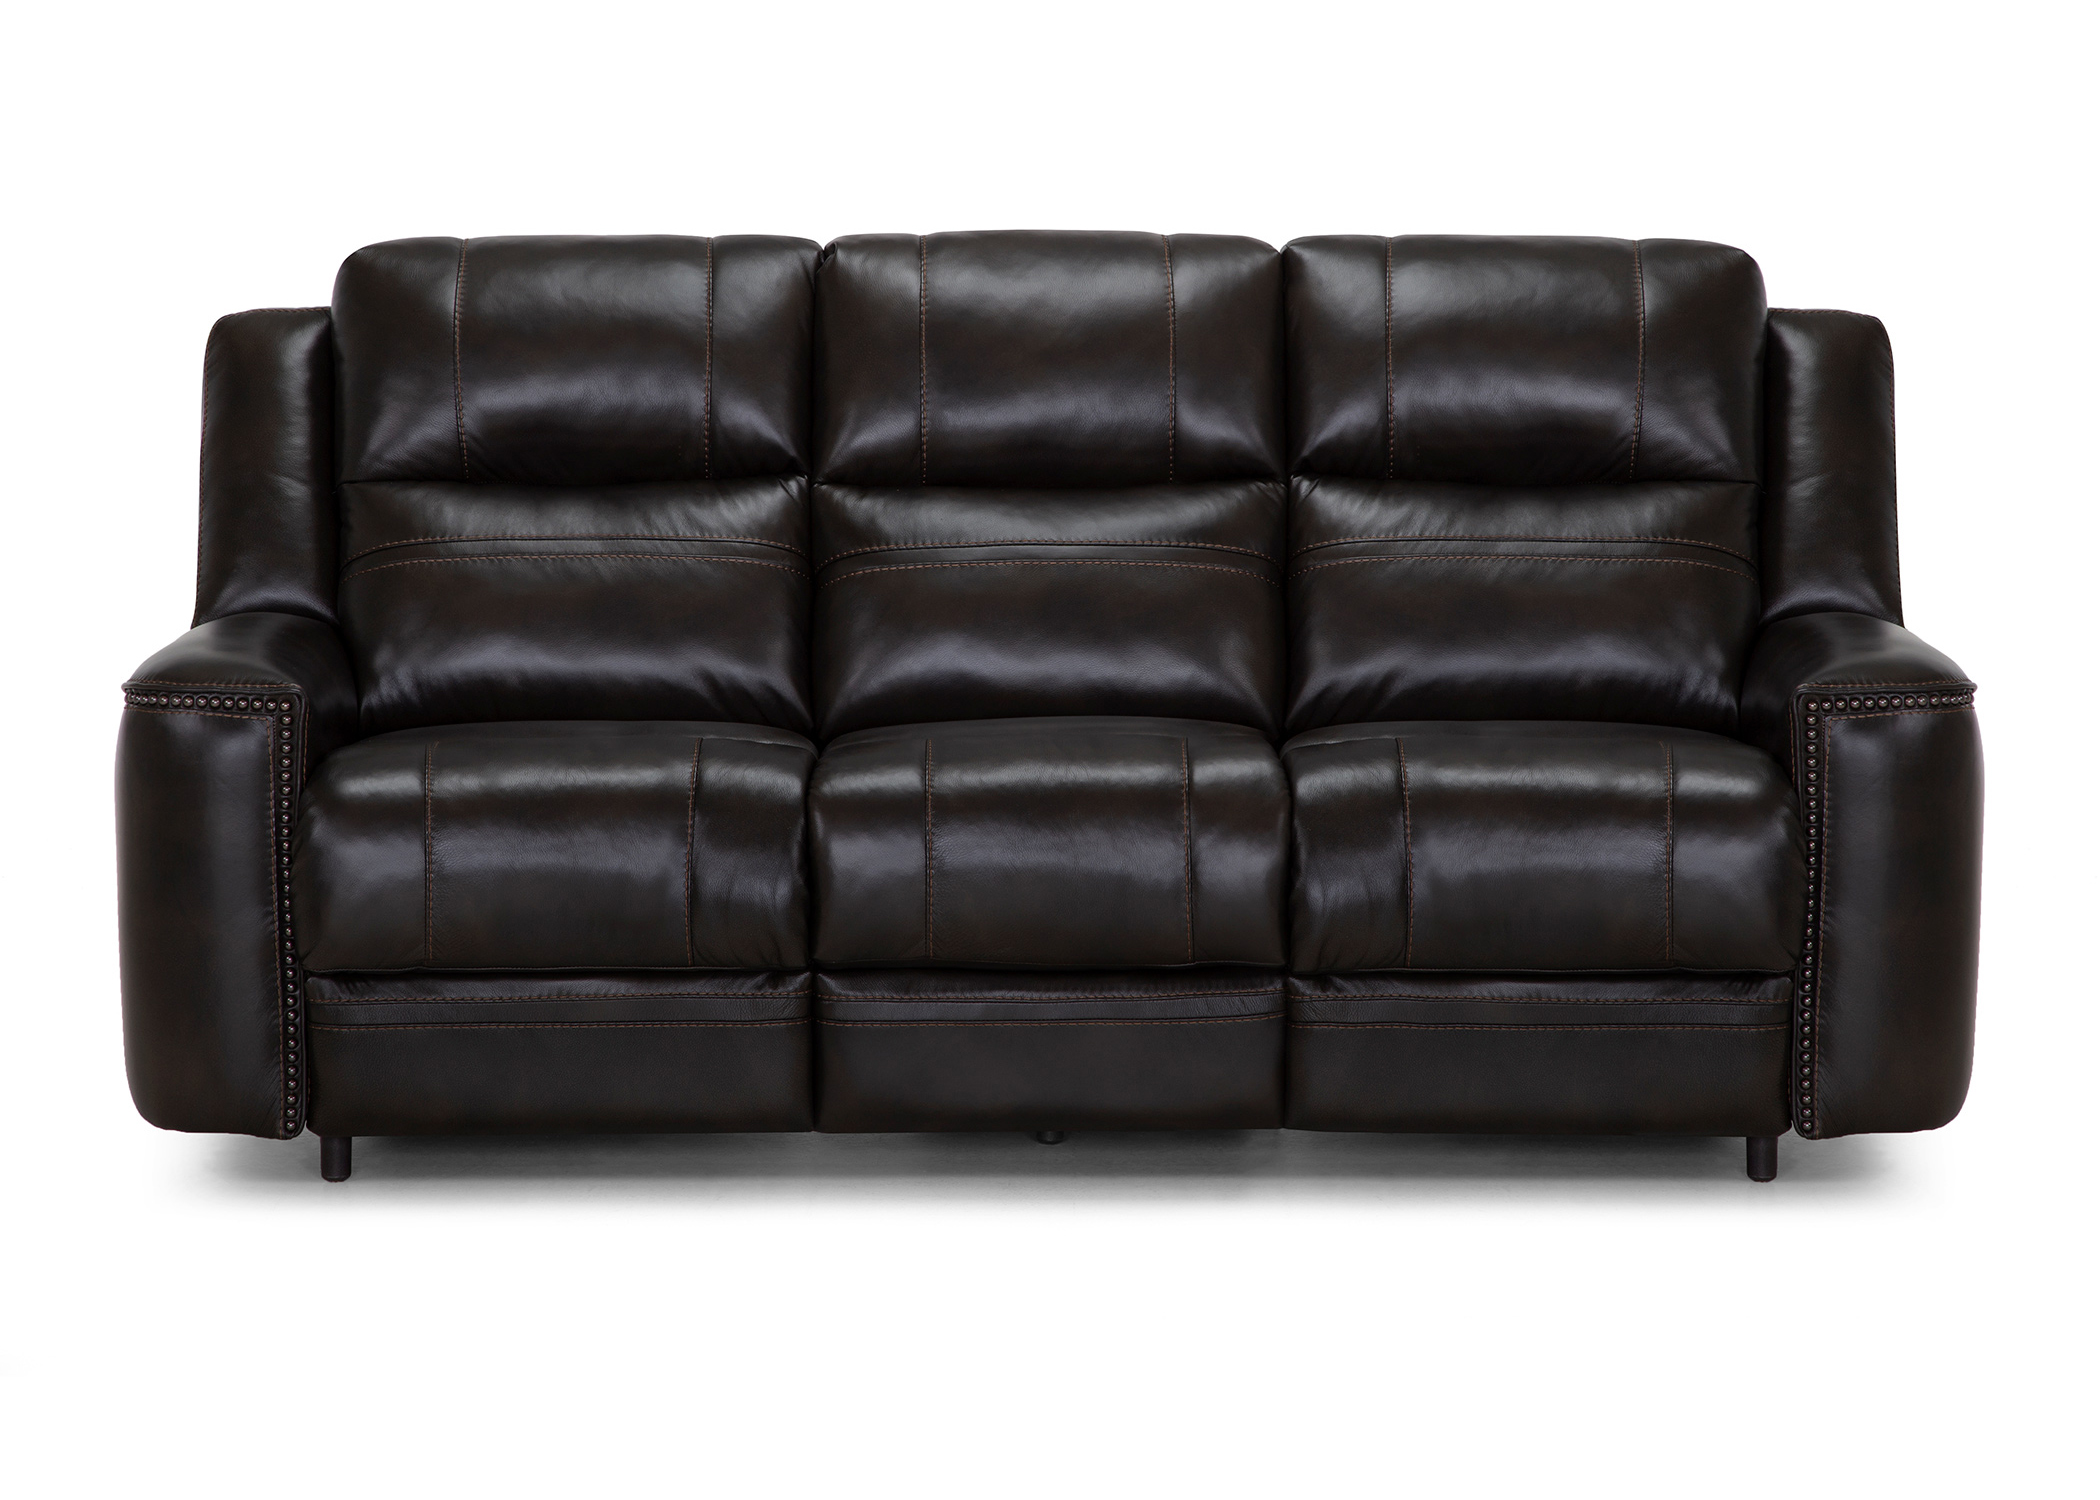  76345 Dual Power Reclining Sofa - Front View 